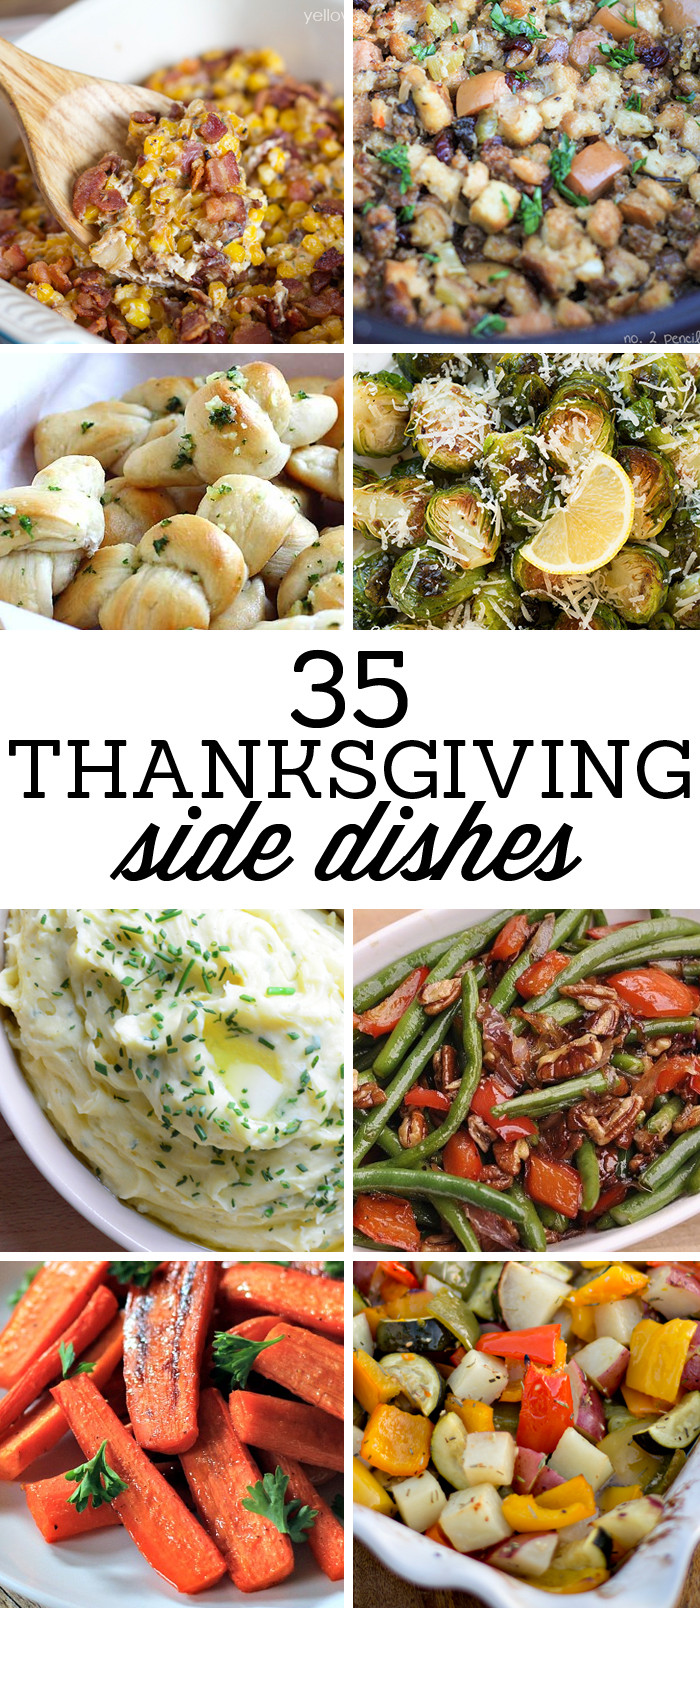 Great Christmas Side Dishes
 35 Side Dishes for Christmas Dinner Yellow Bliss Road